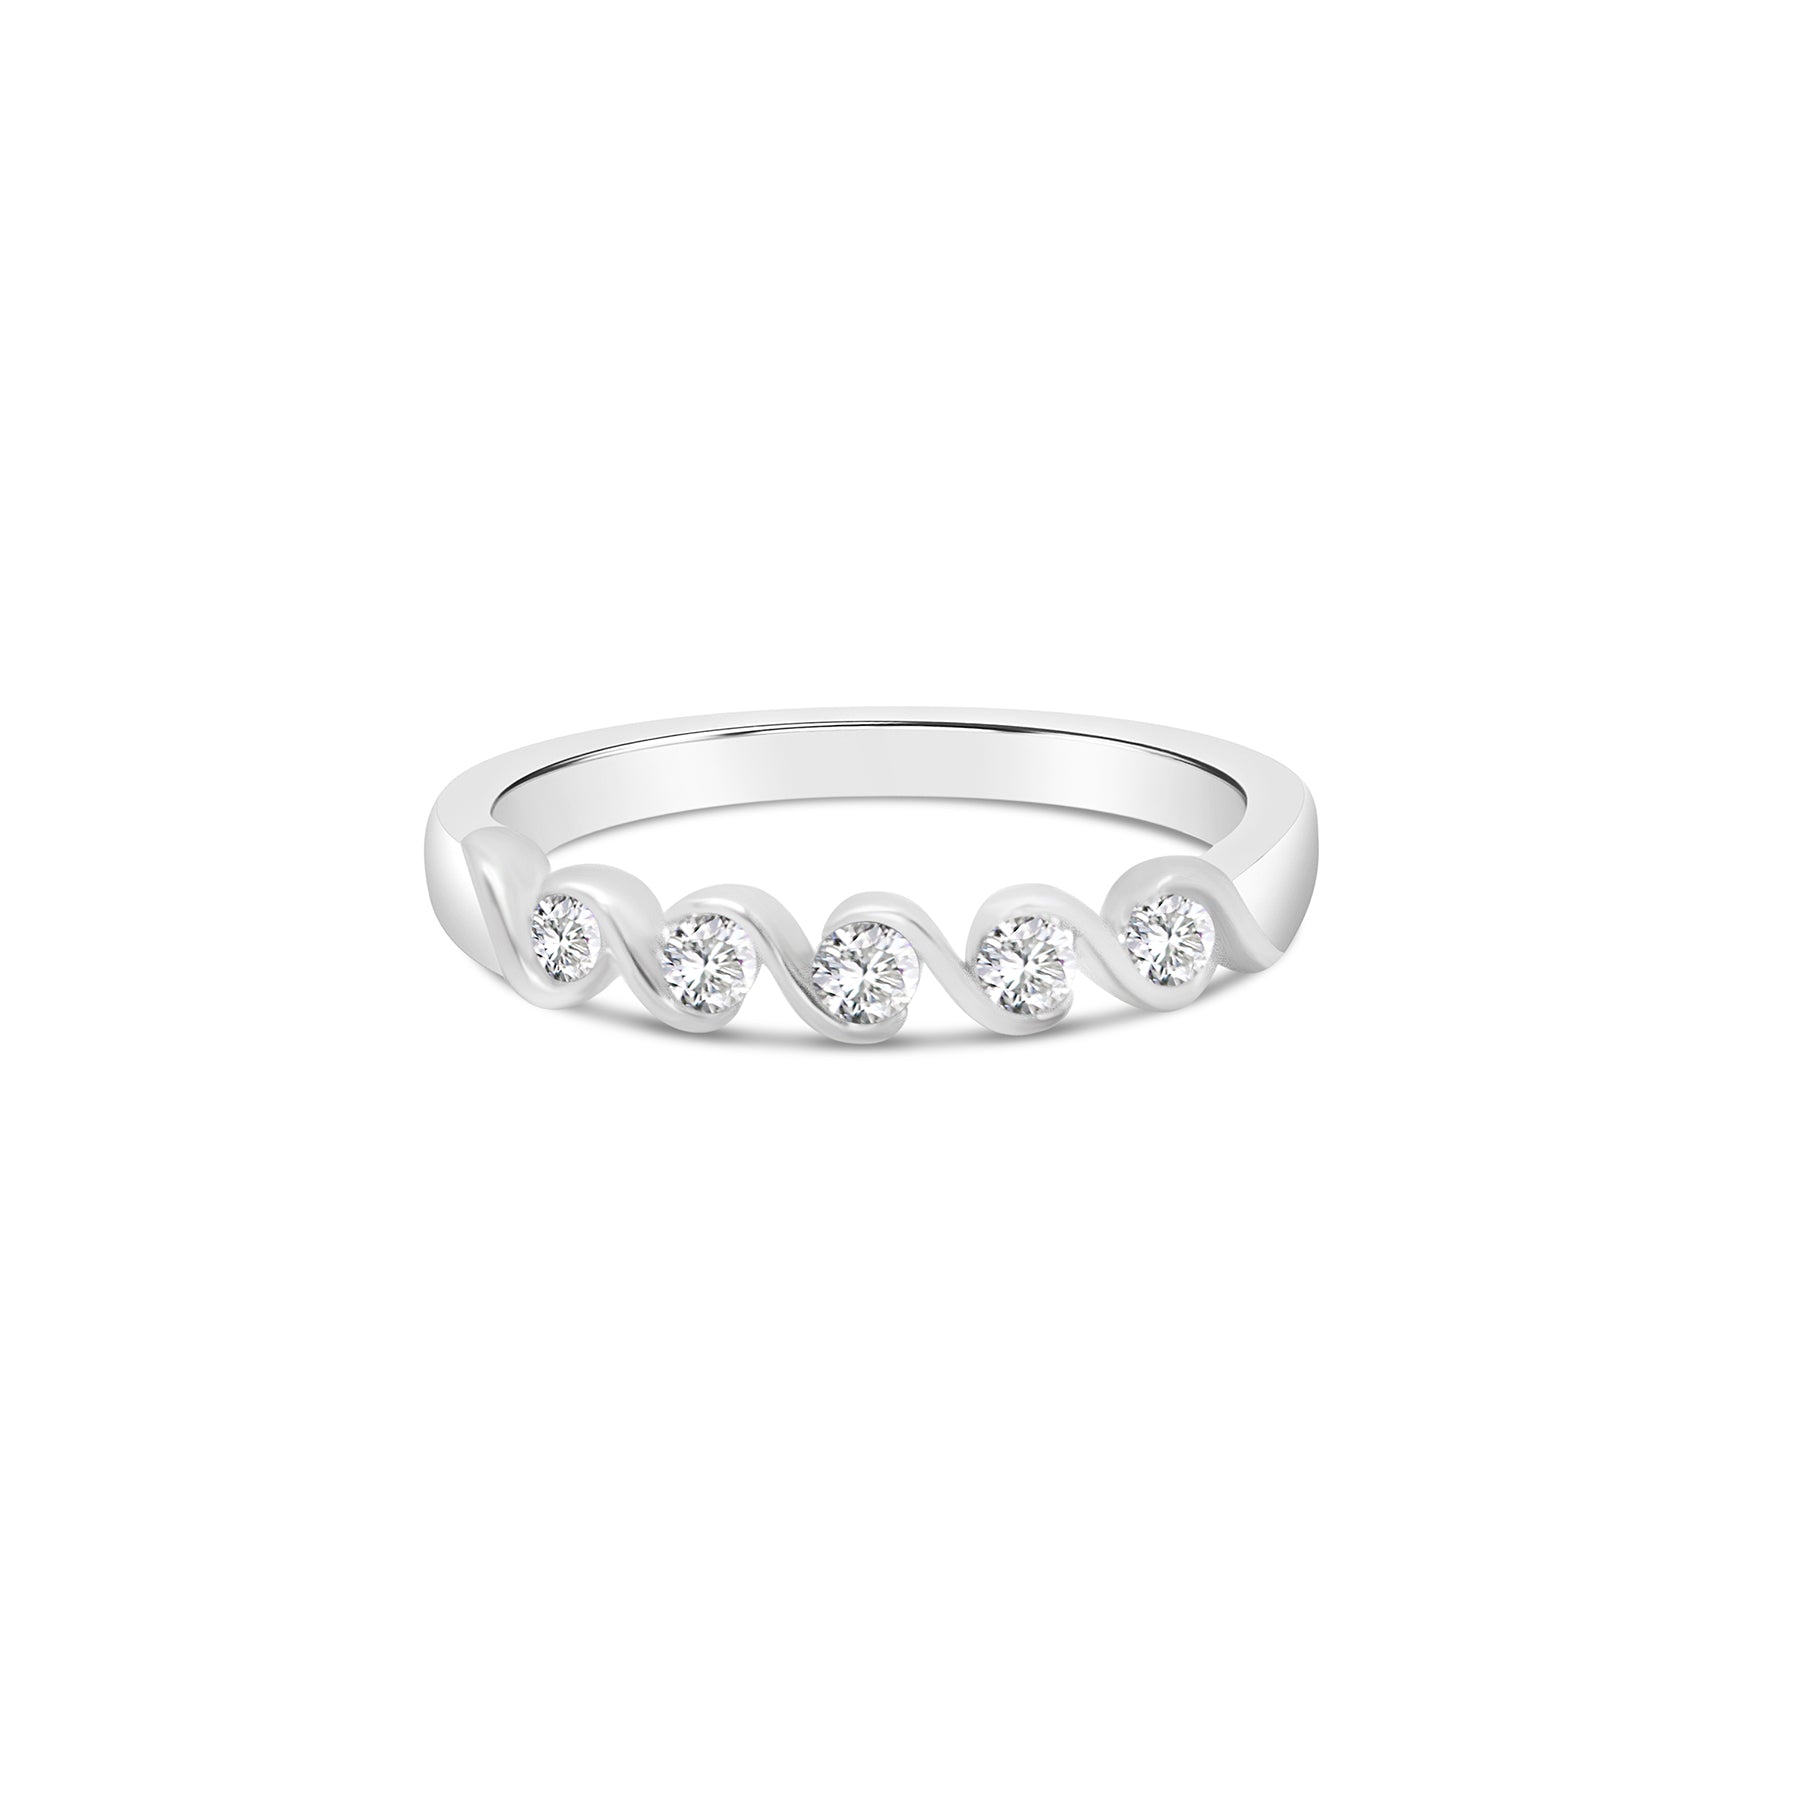 quintuple-silver-cz-ring-flat